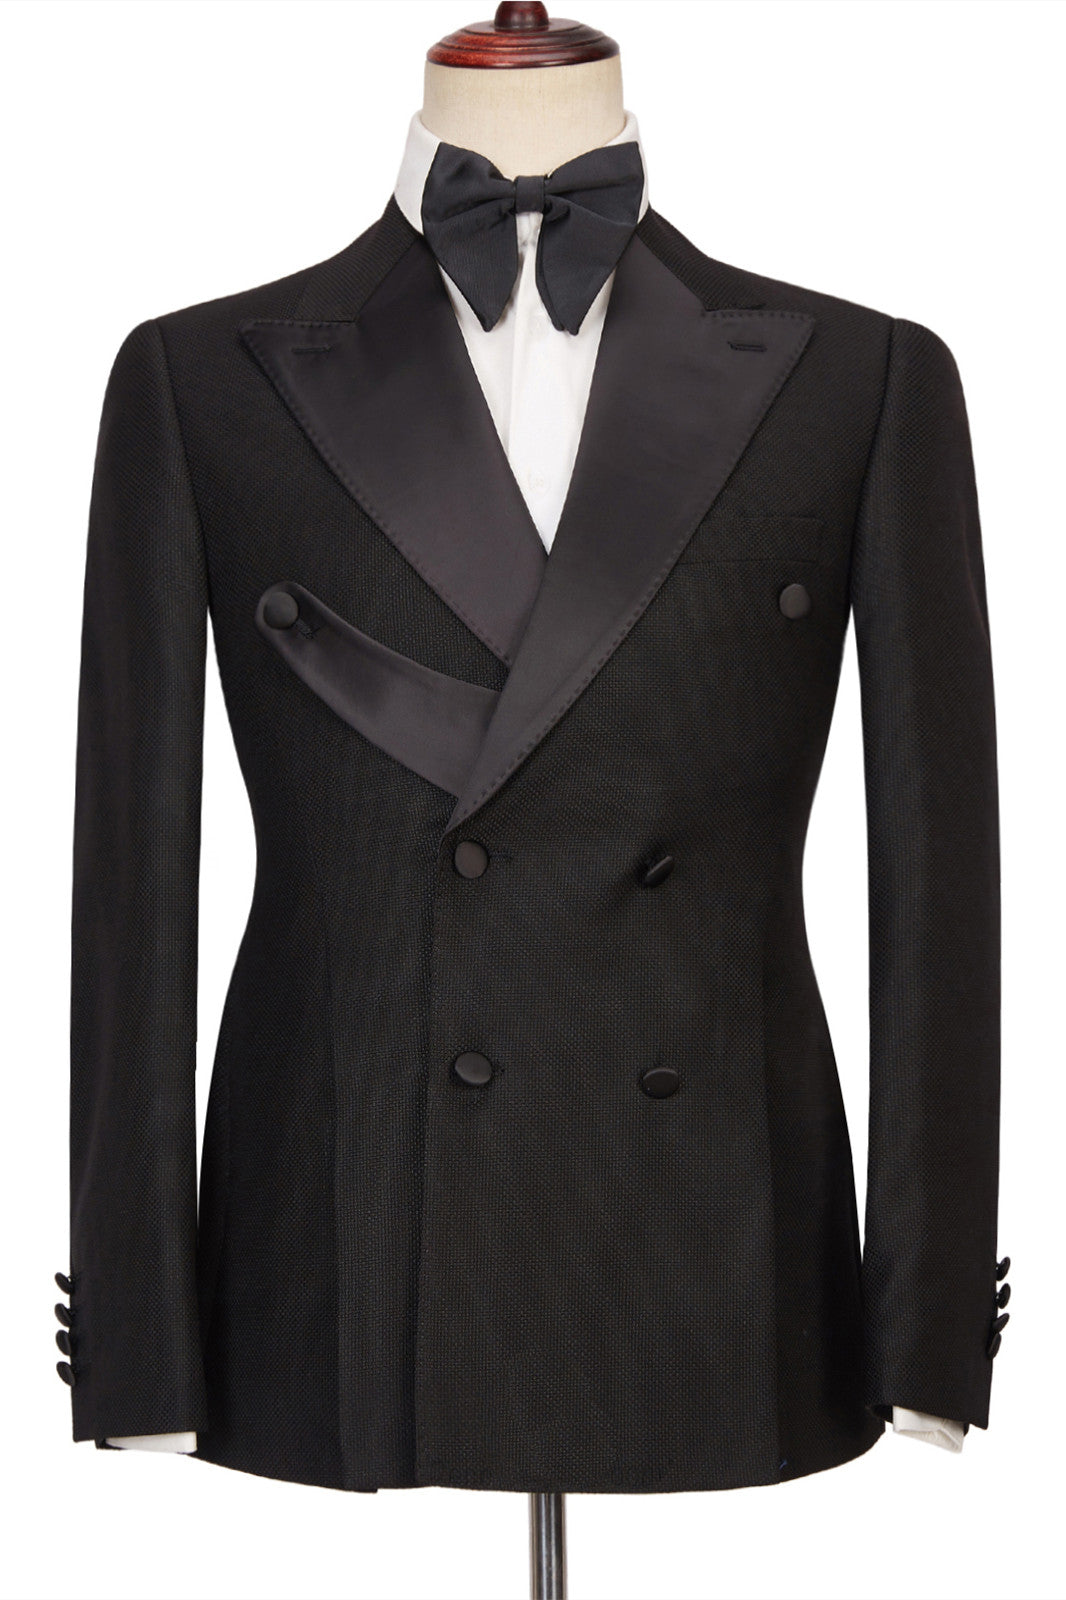 Gavin Latest Design Men's Suits: Black Double Breasted Peaked Lapel Best Fitted